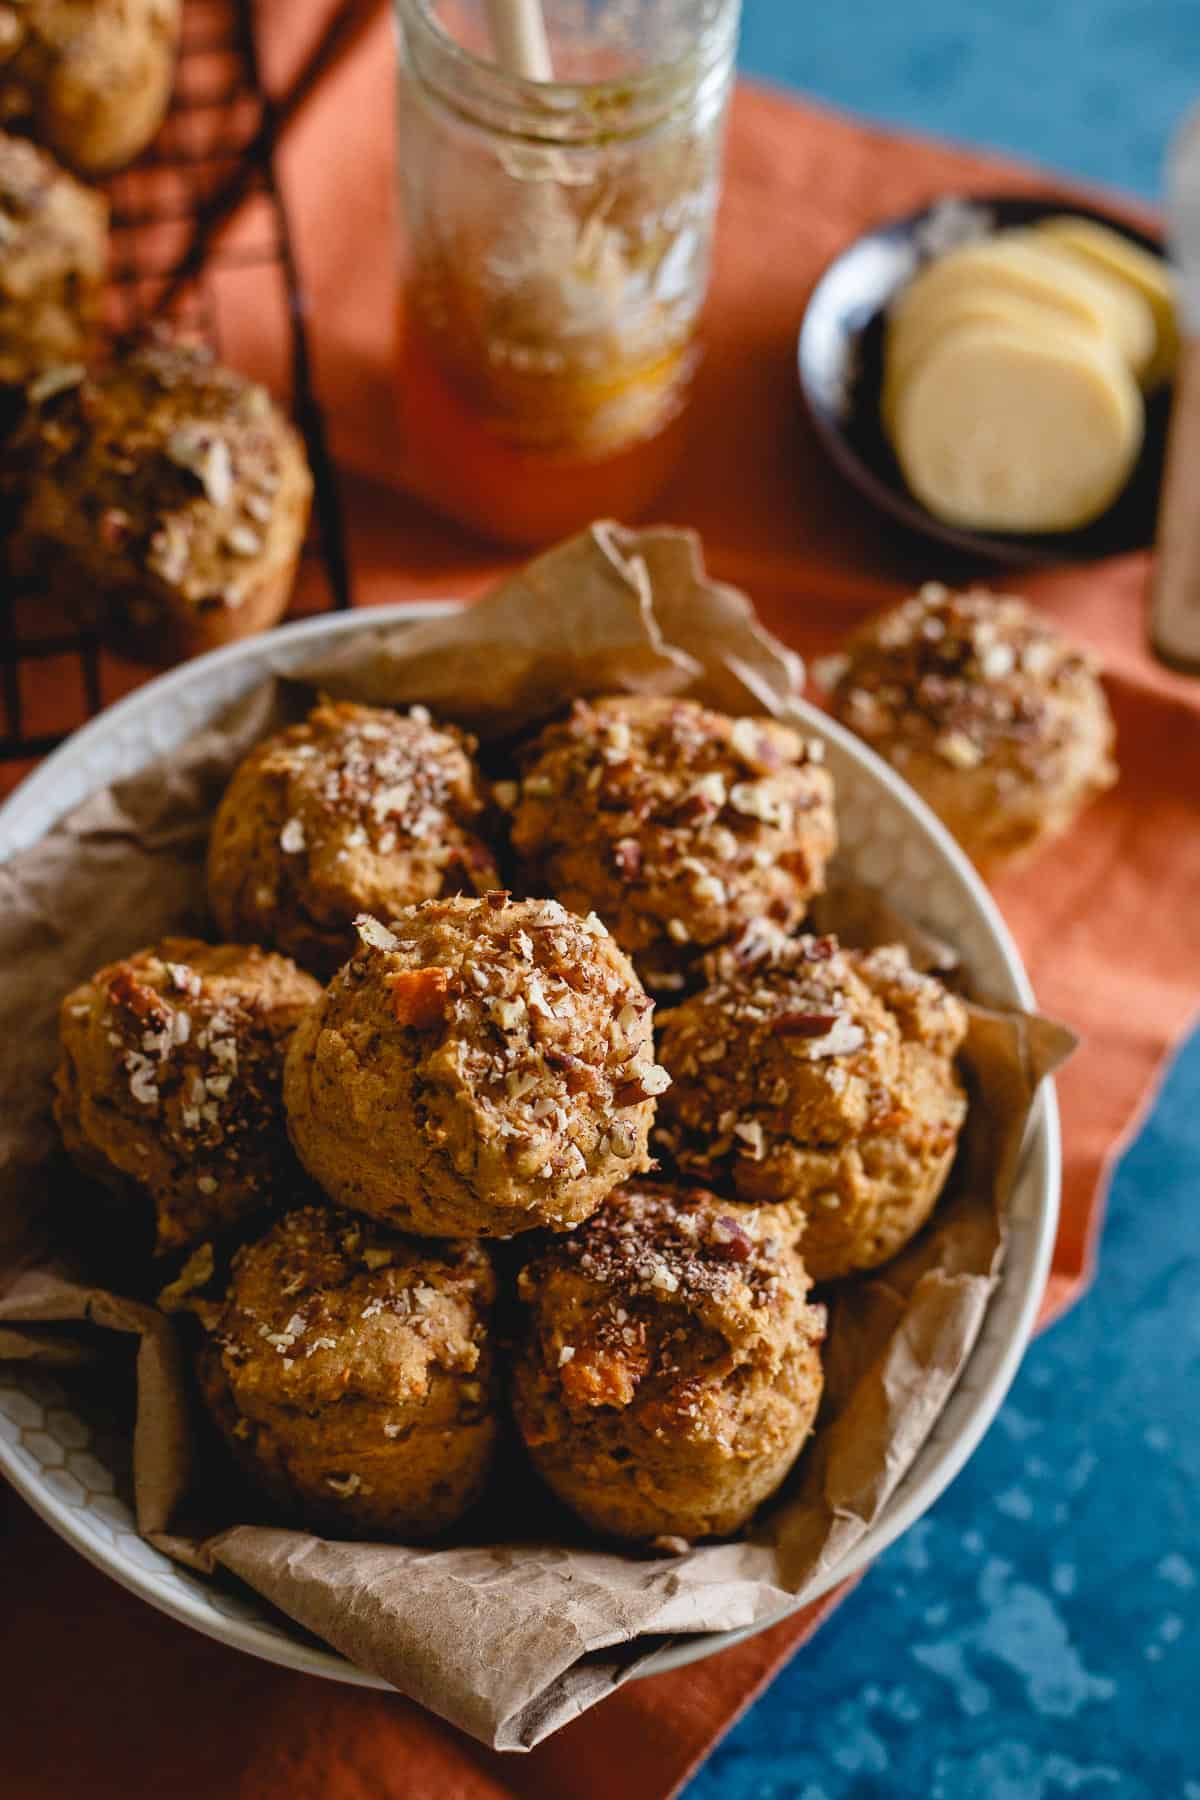 These whole wheat sweet potato banana muffins are perfect for breakfast or as a healthy snack. Smear with butter or drizzle with some quality honey. Best served warm!